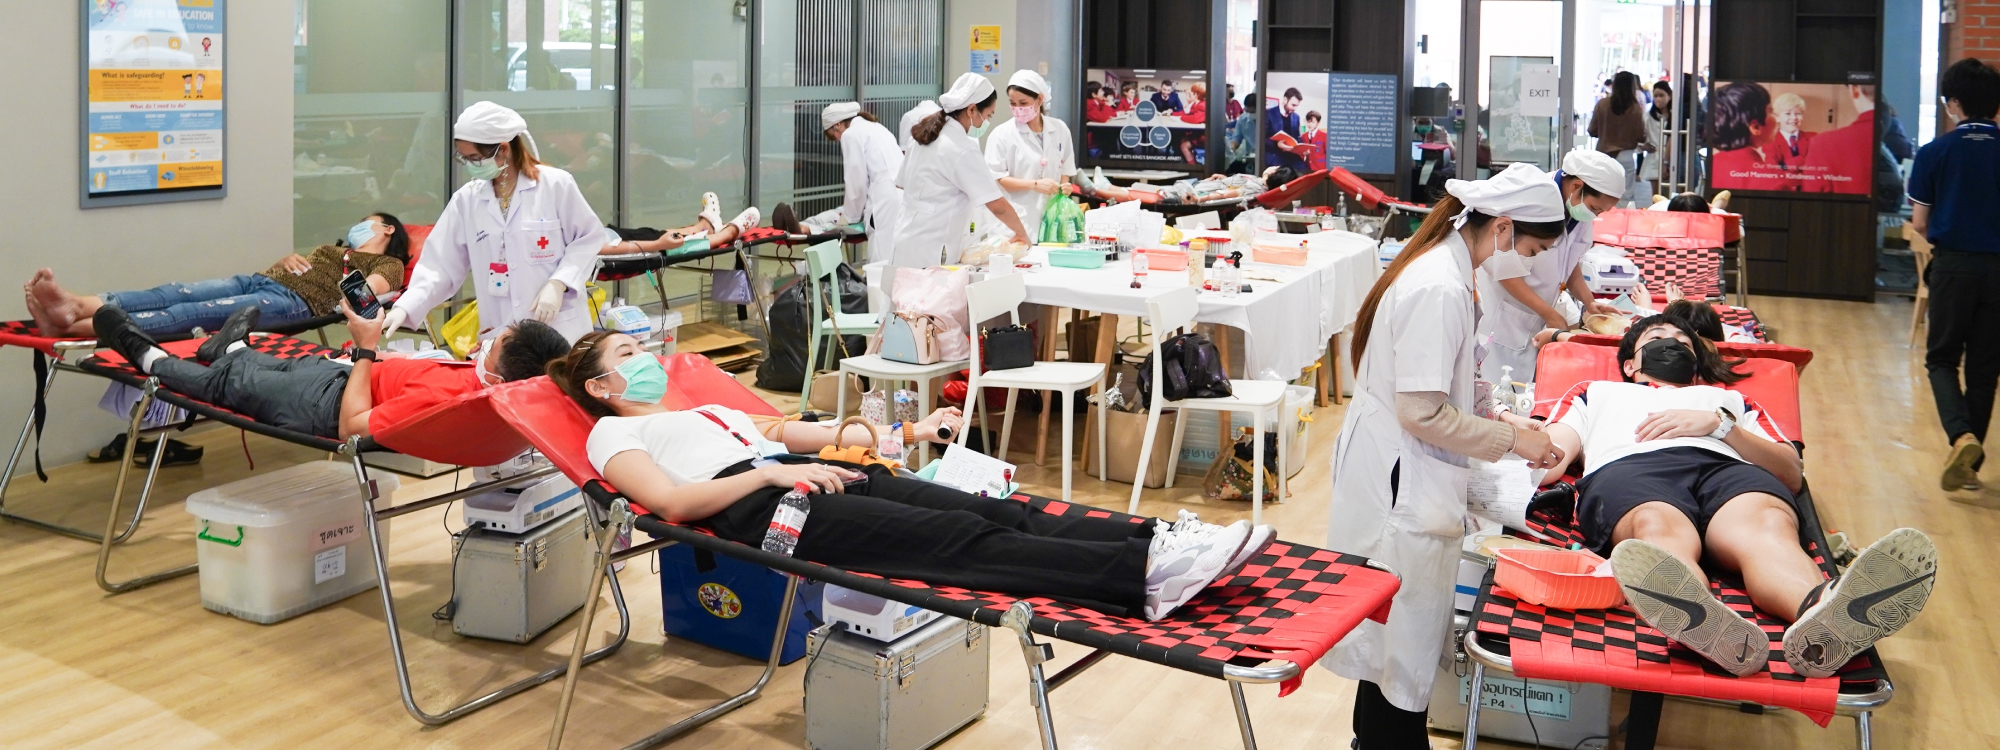 WeCare & WeShare blood donation - the small things that make the difference